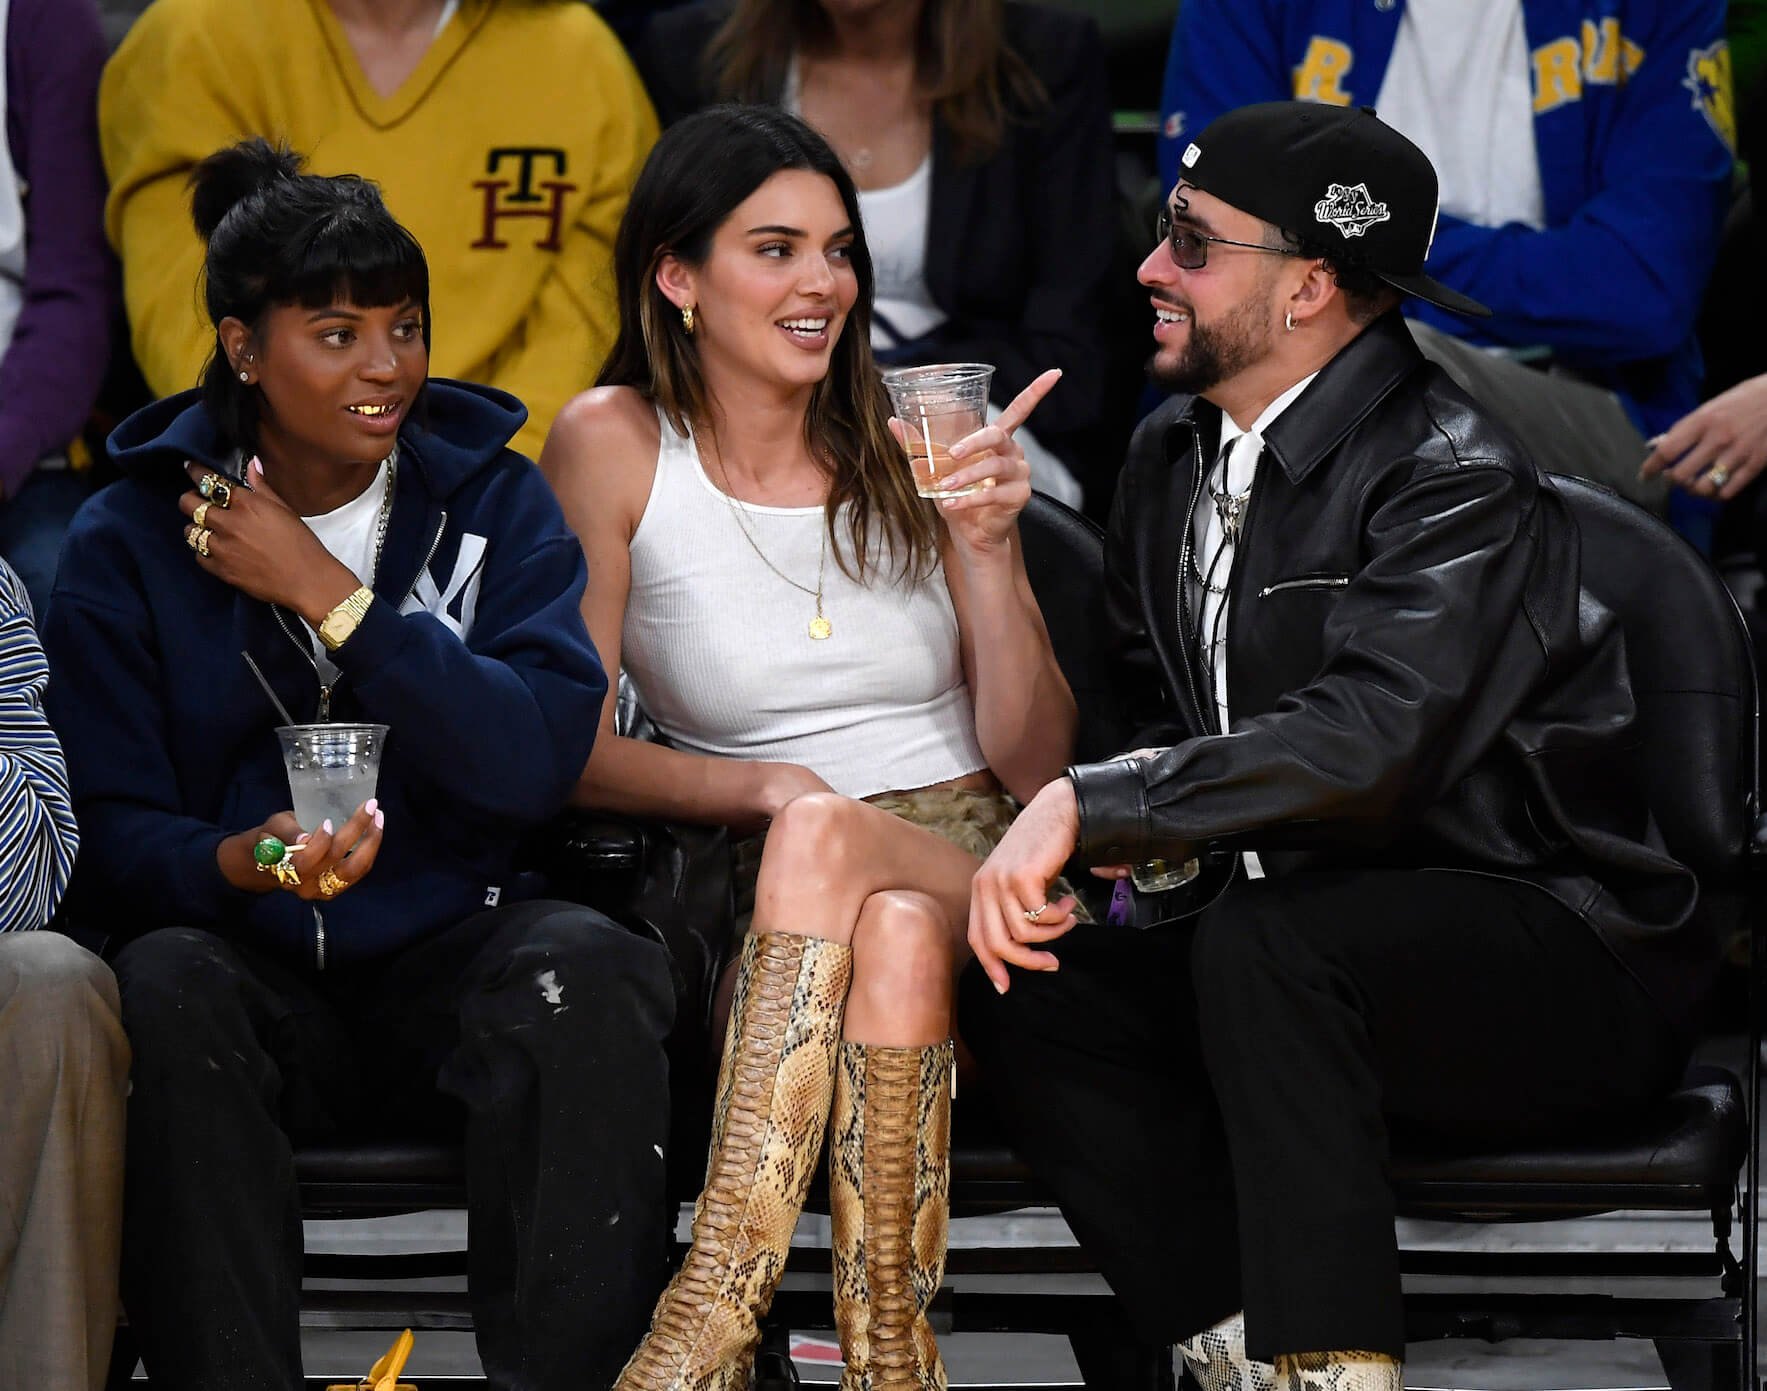 Are Kendall Jenner and Bad Bunny Back Together? Rumors Spark After Met Gala